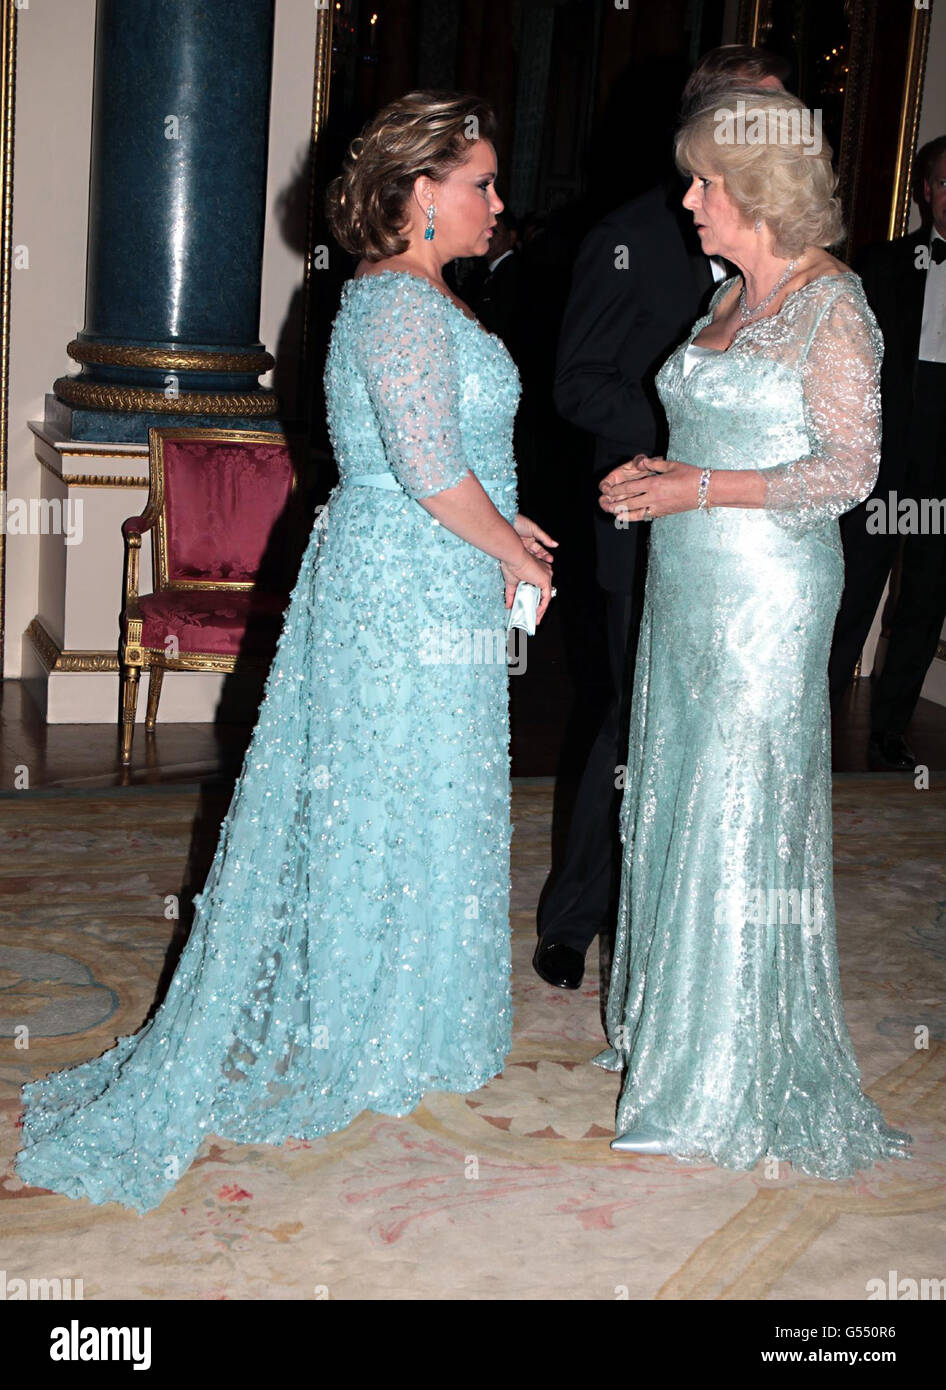 The Duchess of Cornwall greets Grand-Duchess Maria Teresa of Luxembourg as she arrives for a dinner at Buckingham Palace, London, for foreign sovereigns to commemorate the Diamond Jubilee. Stock Photo